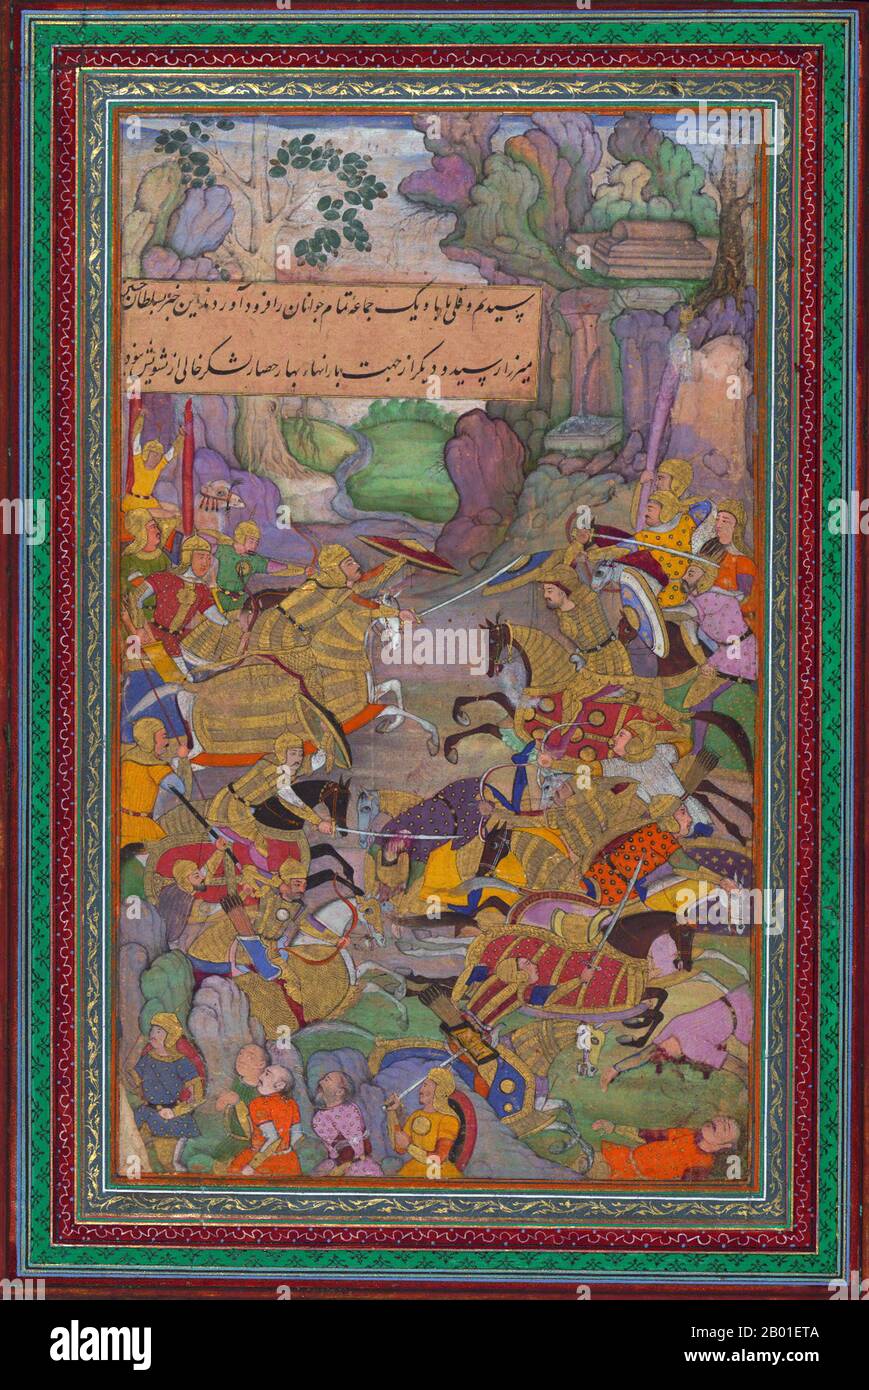 India: Babur defeats his foes. Miniature painting from the Baburnama, late 16th century.  Bāburnāma (literally: 'Book of Babur' or 'Letters of Babur'; alternatively known as Tuzk-e Babri) is the name given to the memoirs of Ẓahīr ud-Dīn Muḥammad Bābur (1483-1530), founder of the Mughal Empire and a great-great-great-grandson of Timur. It is an autobiographical work, originally written in the Chagatai language, known to Babur as 'Turki' (meaning Turkic), the spoken language of the Andijan-Timurids. Stock Photo